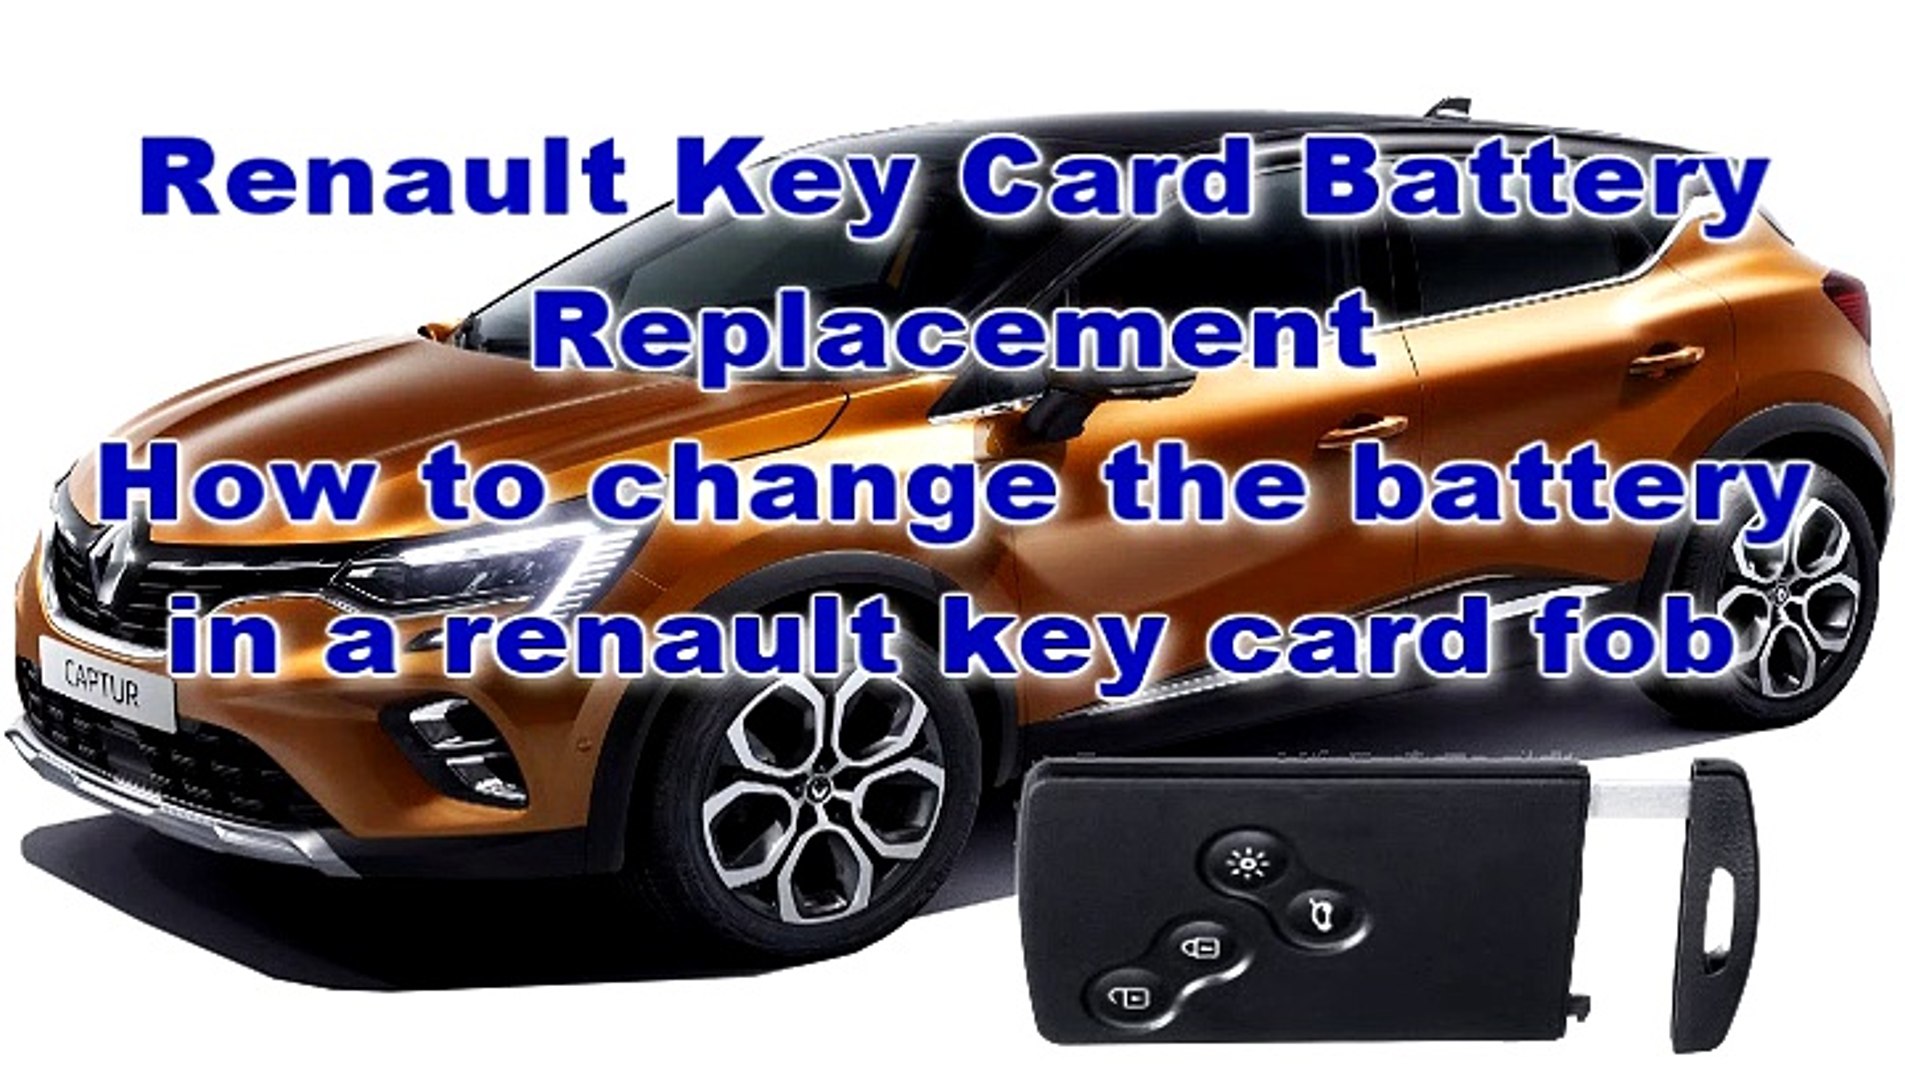 Renault Key Card Battery Replacement - How to change the battery in a renault  key card fob - video Dailymotion